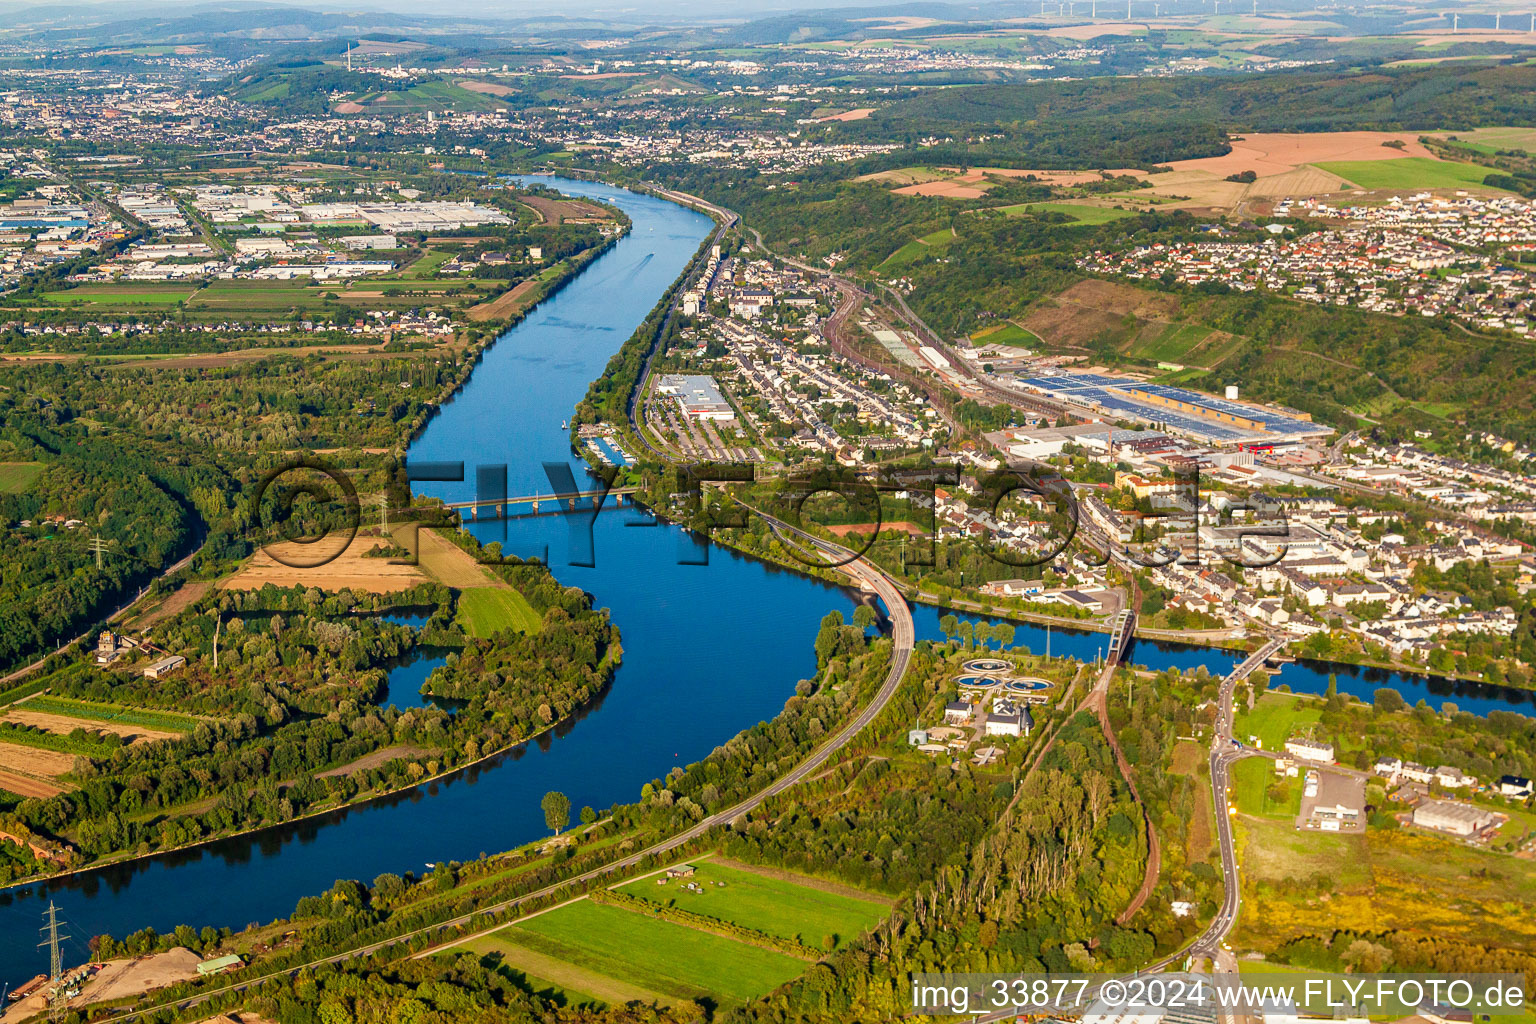 Riparian areas along the river mouth of the river Saar into the river Mosel in Konz in the state Rhineland-Palatinate